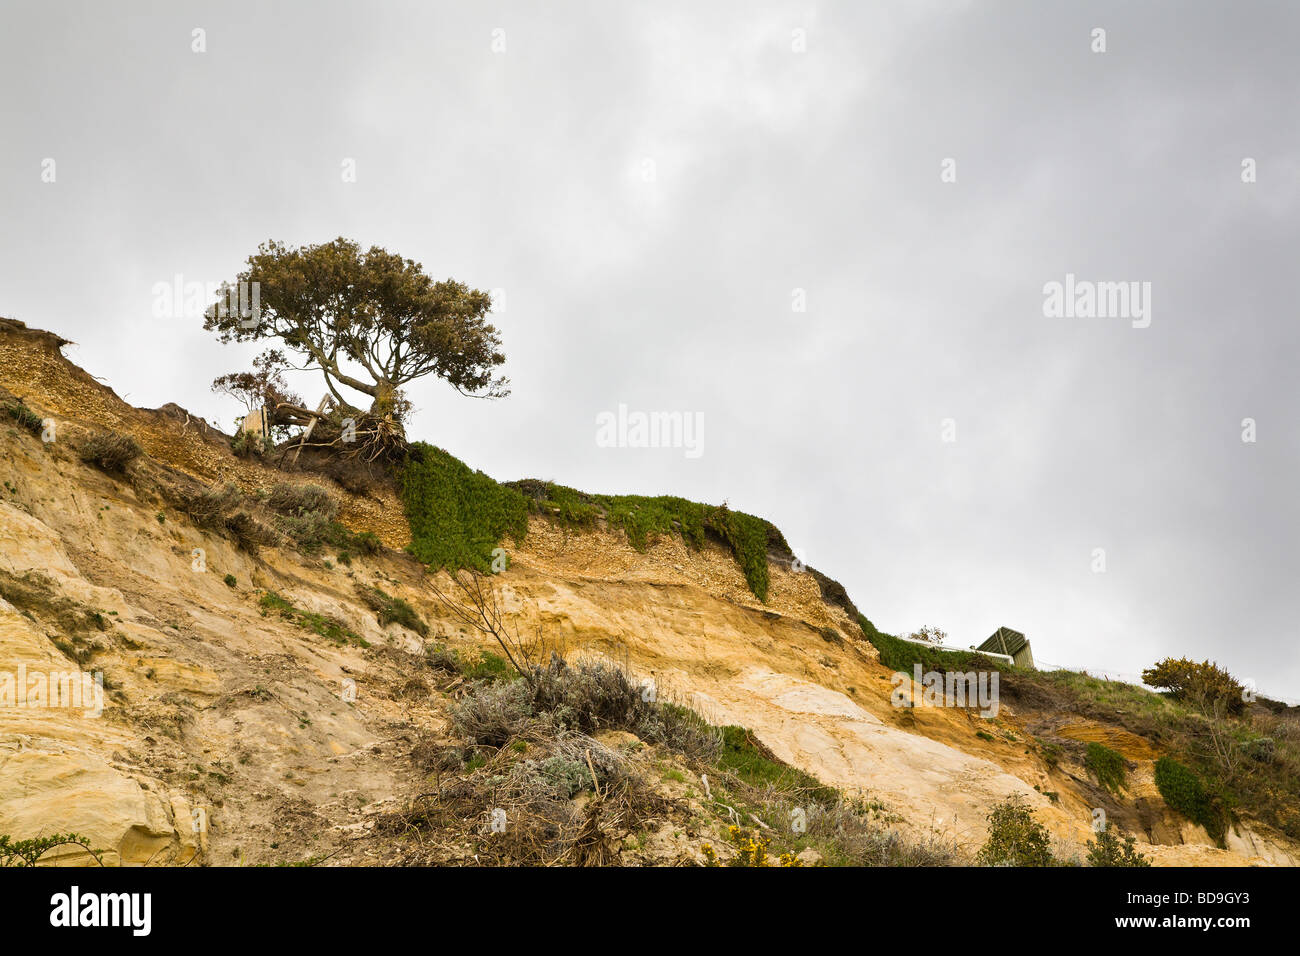 A landslip and erosion of sandstone cliffs at Alum Chine beach, Bournemouth, Dorset. UK. Stock Photo